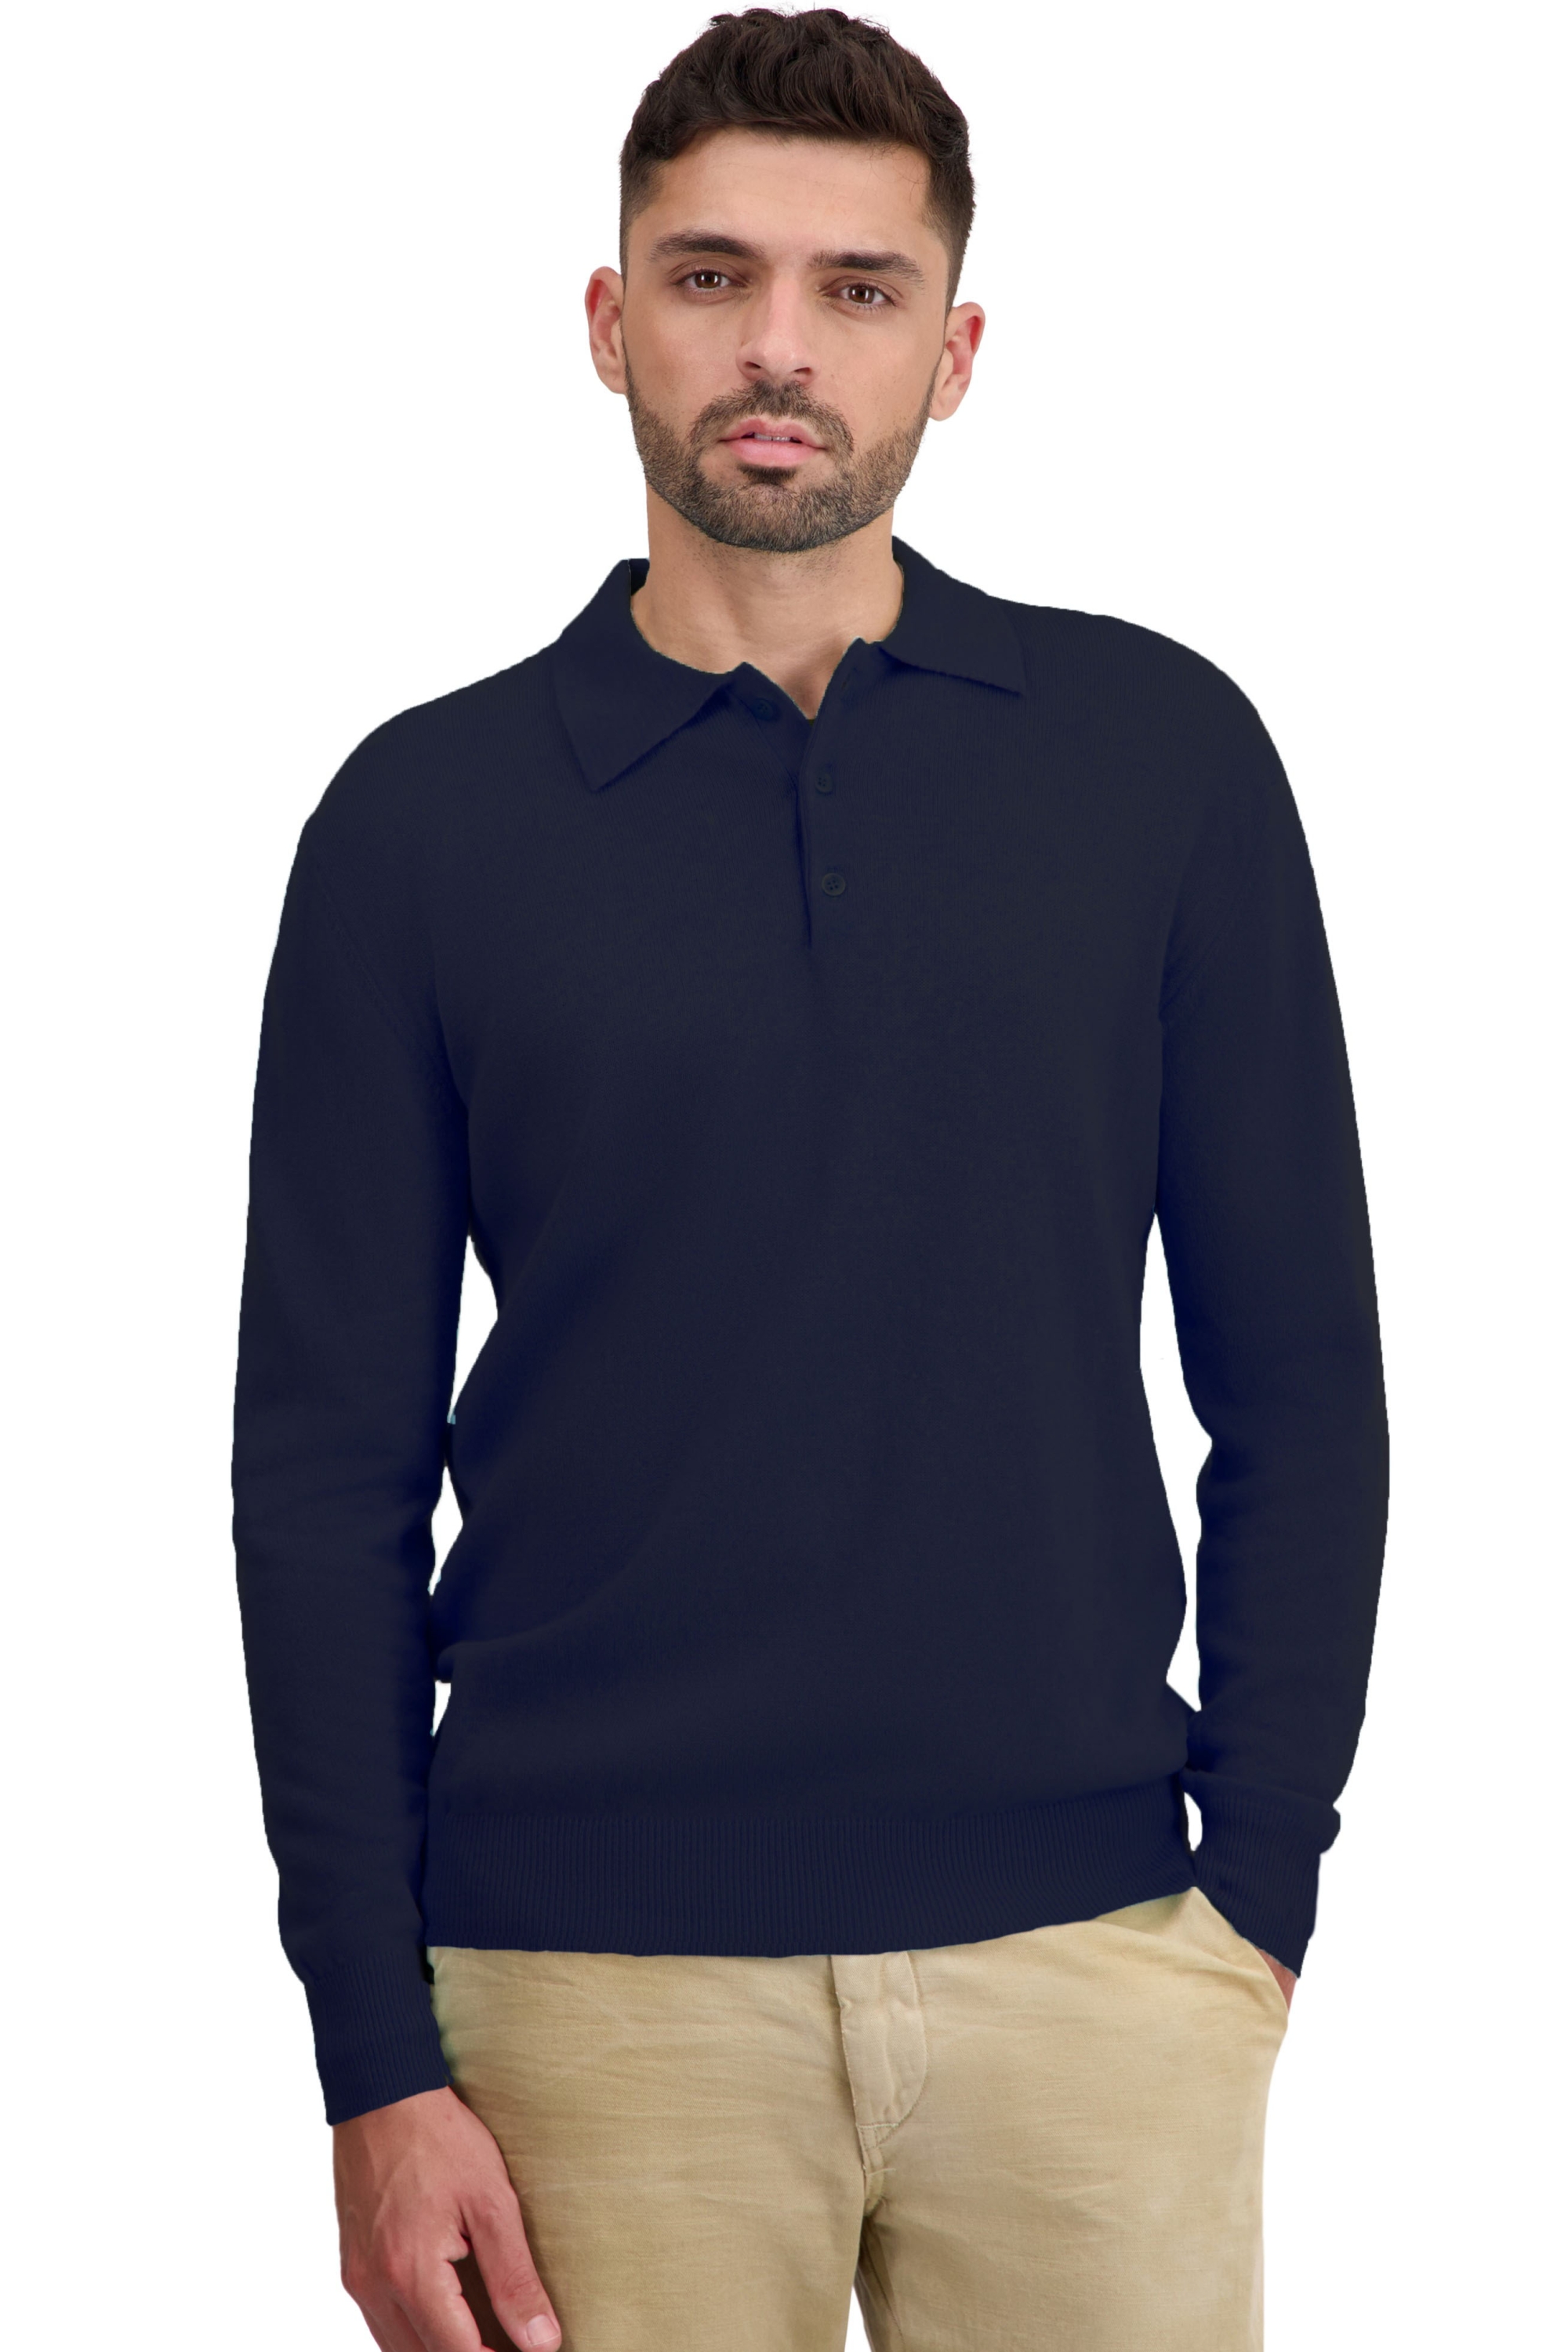 Cashmere men basic sweaters at low prices tarn first dress blue 3xl